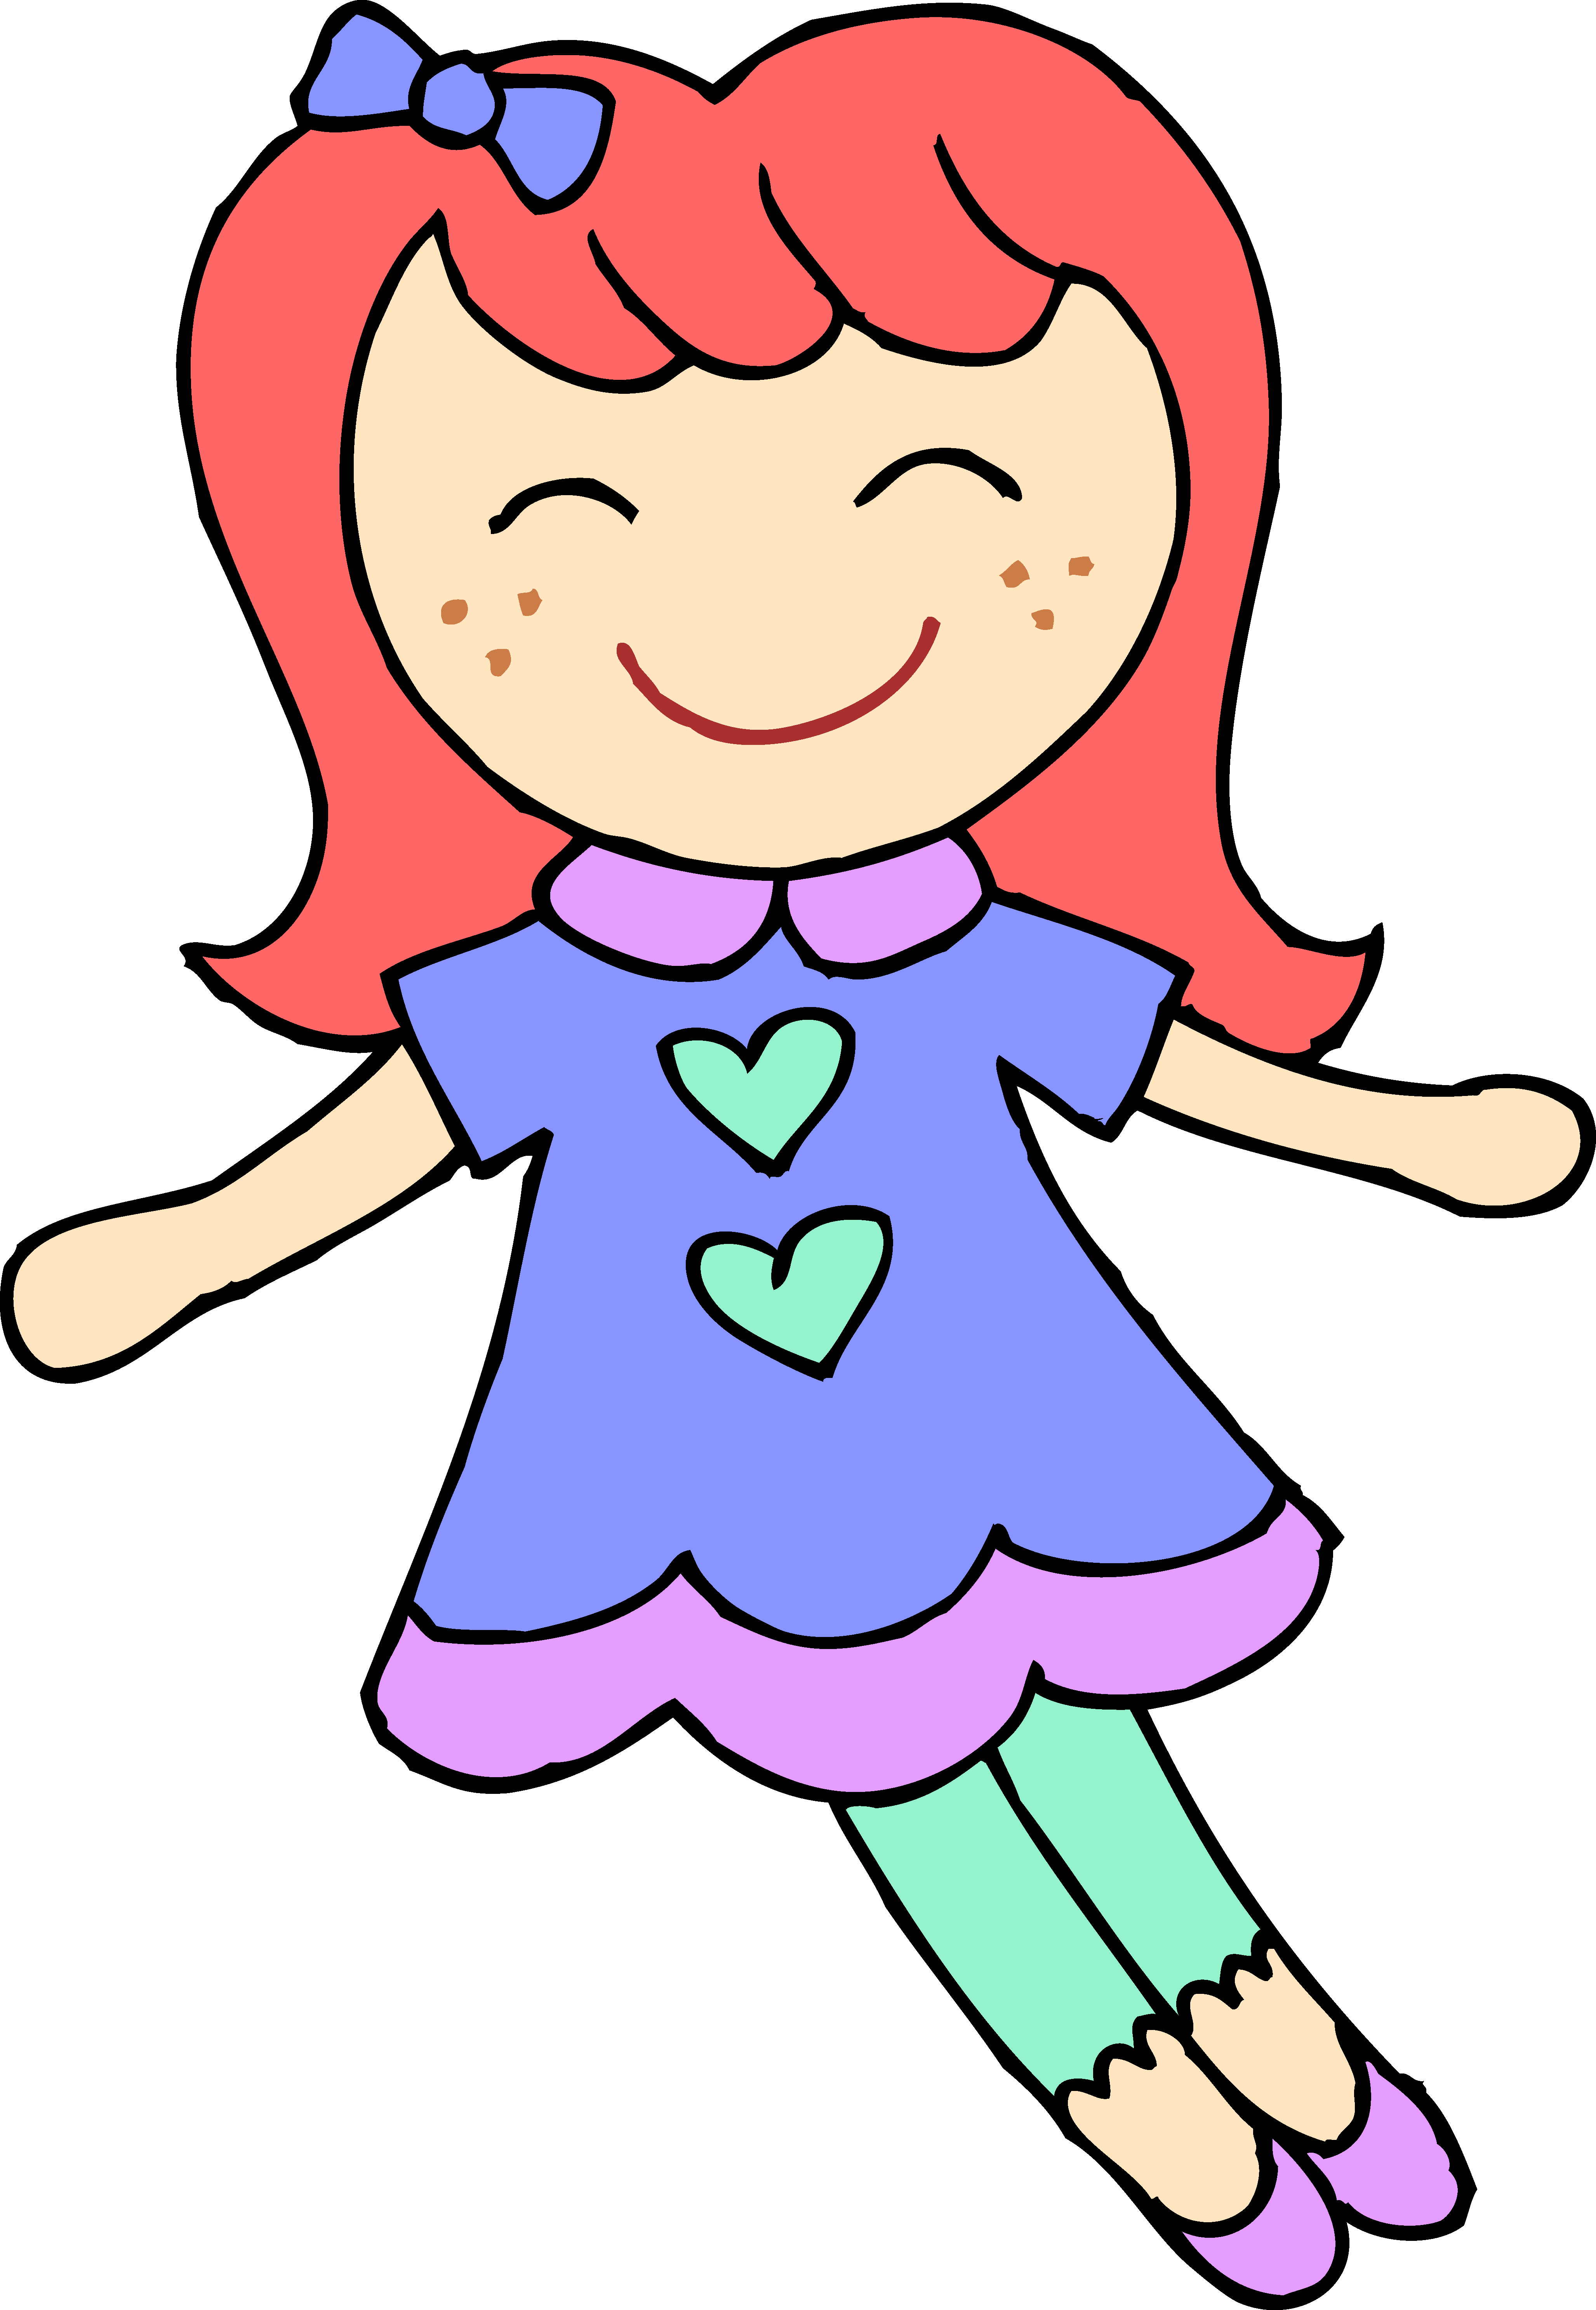 doll clipart images - photo #2